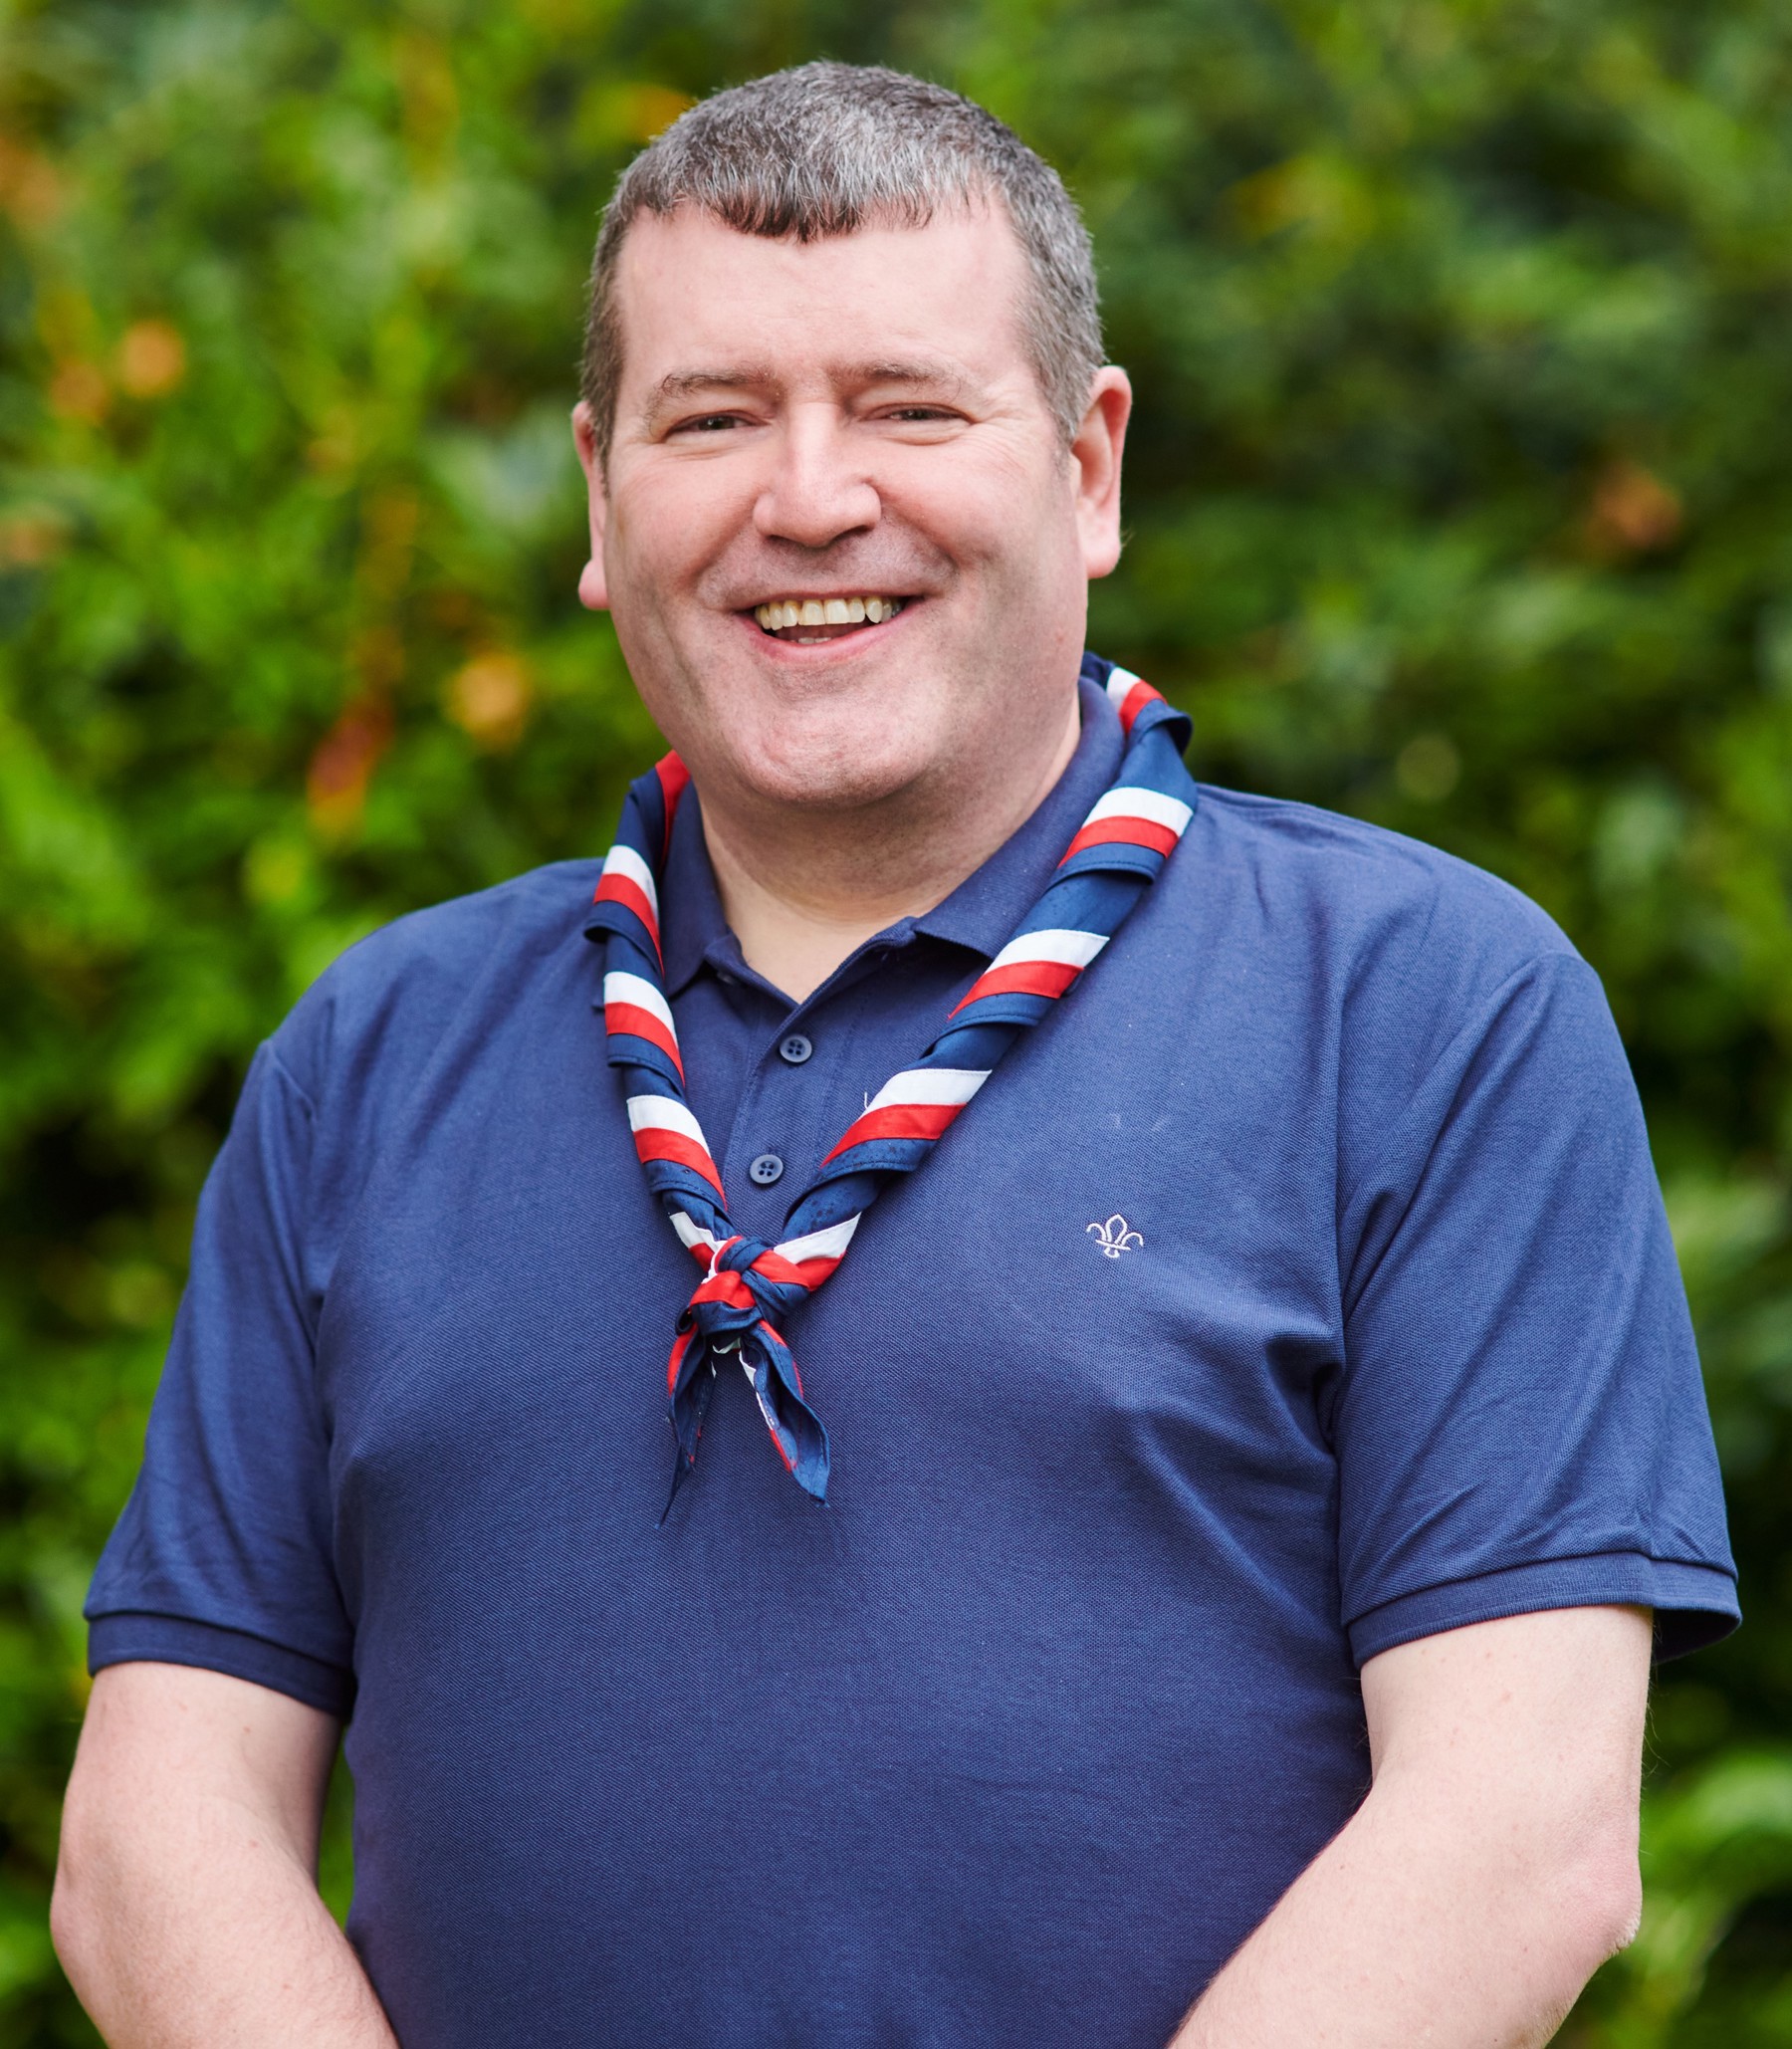 Andrew Sharkey smiling at the camera while wearing a navy Scouts polo shirt and stripy scarf